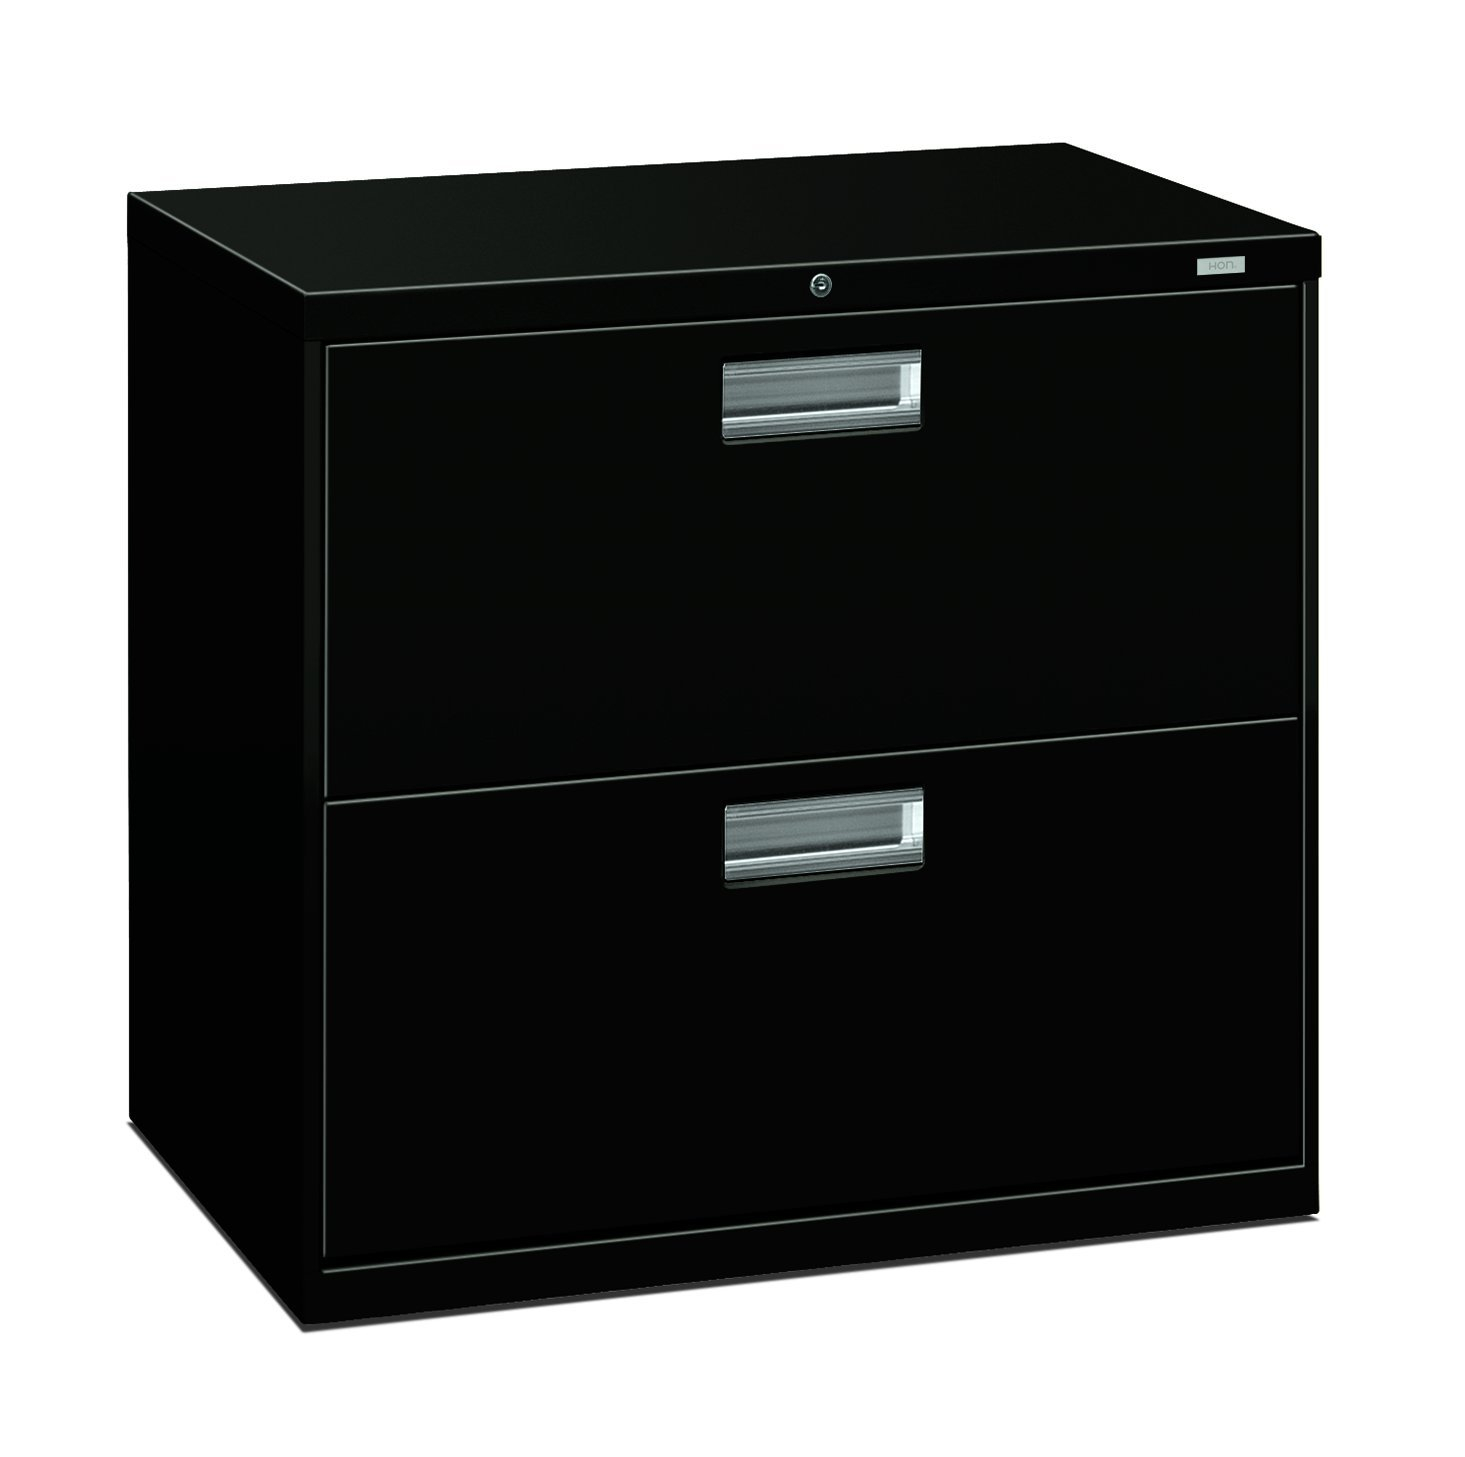 Outstanding Black File Cabinet 2 Drawer Metal Dividers Home Lockable in proportions 1465 X 1457